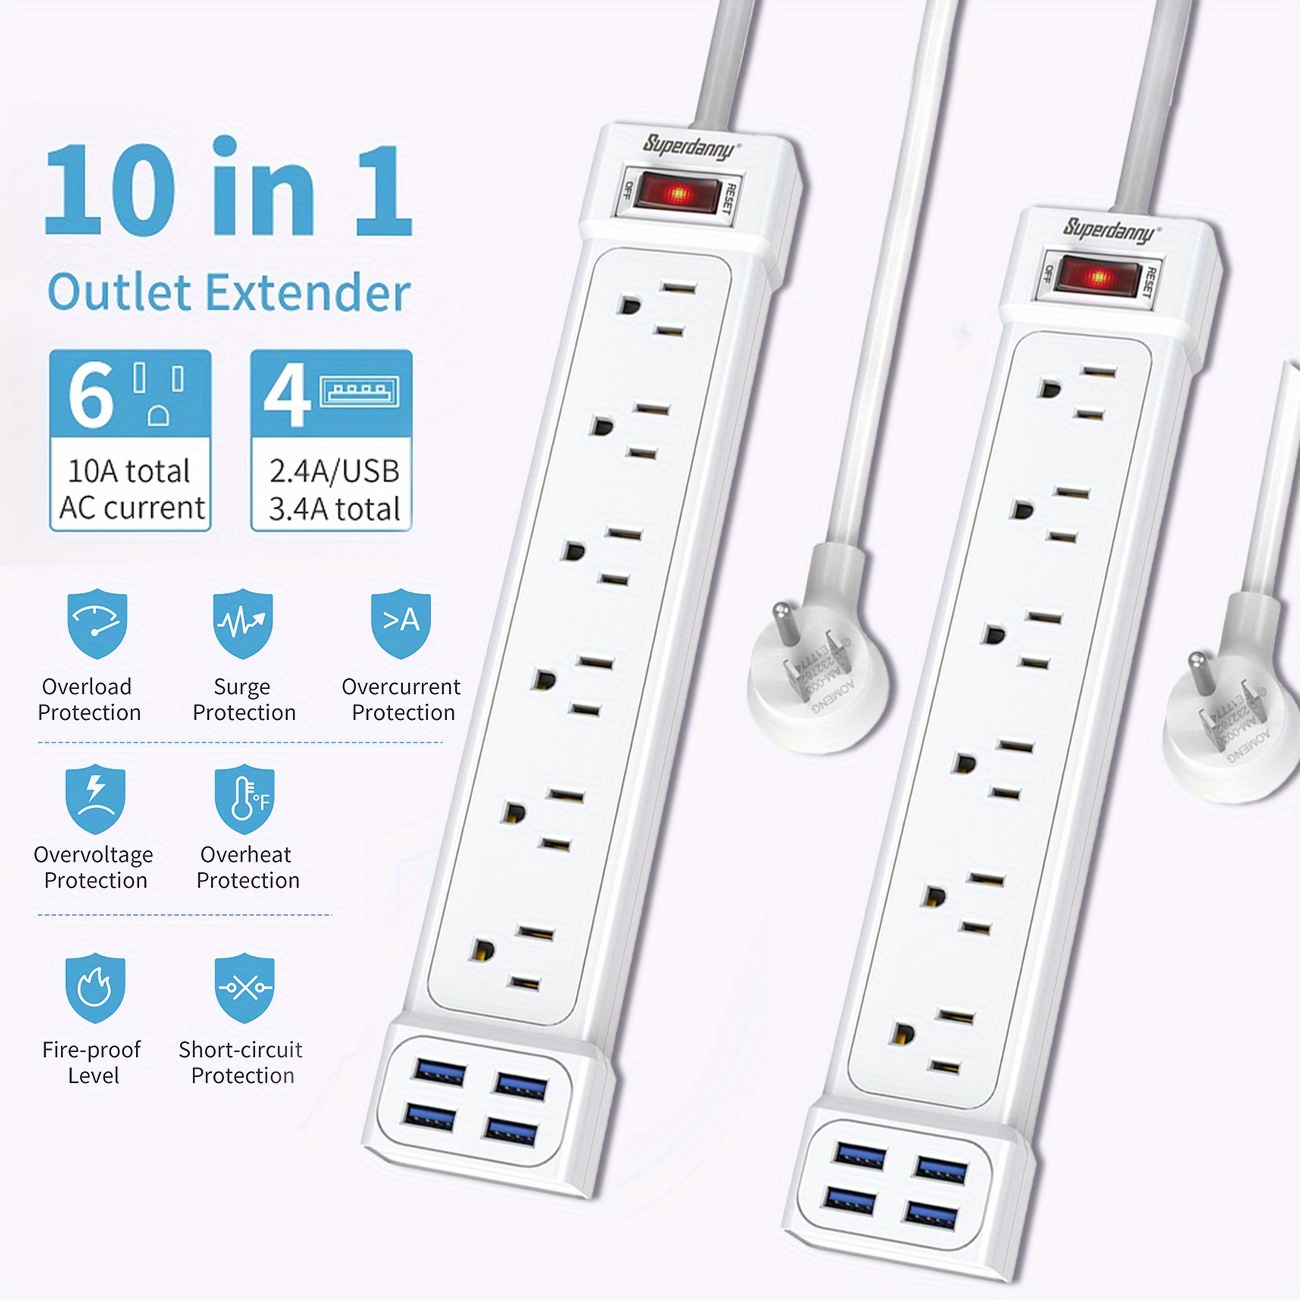 

1/ 2 Pack 4 Usb Power Strip, 6 Outlets Eextender, 900joules Protector, 4 Ft Extension Cord Flat Plug, Wall Mountable Extension Socket For Home Kitchen Office Dorm Essentials, Black/ White